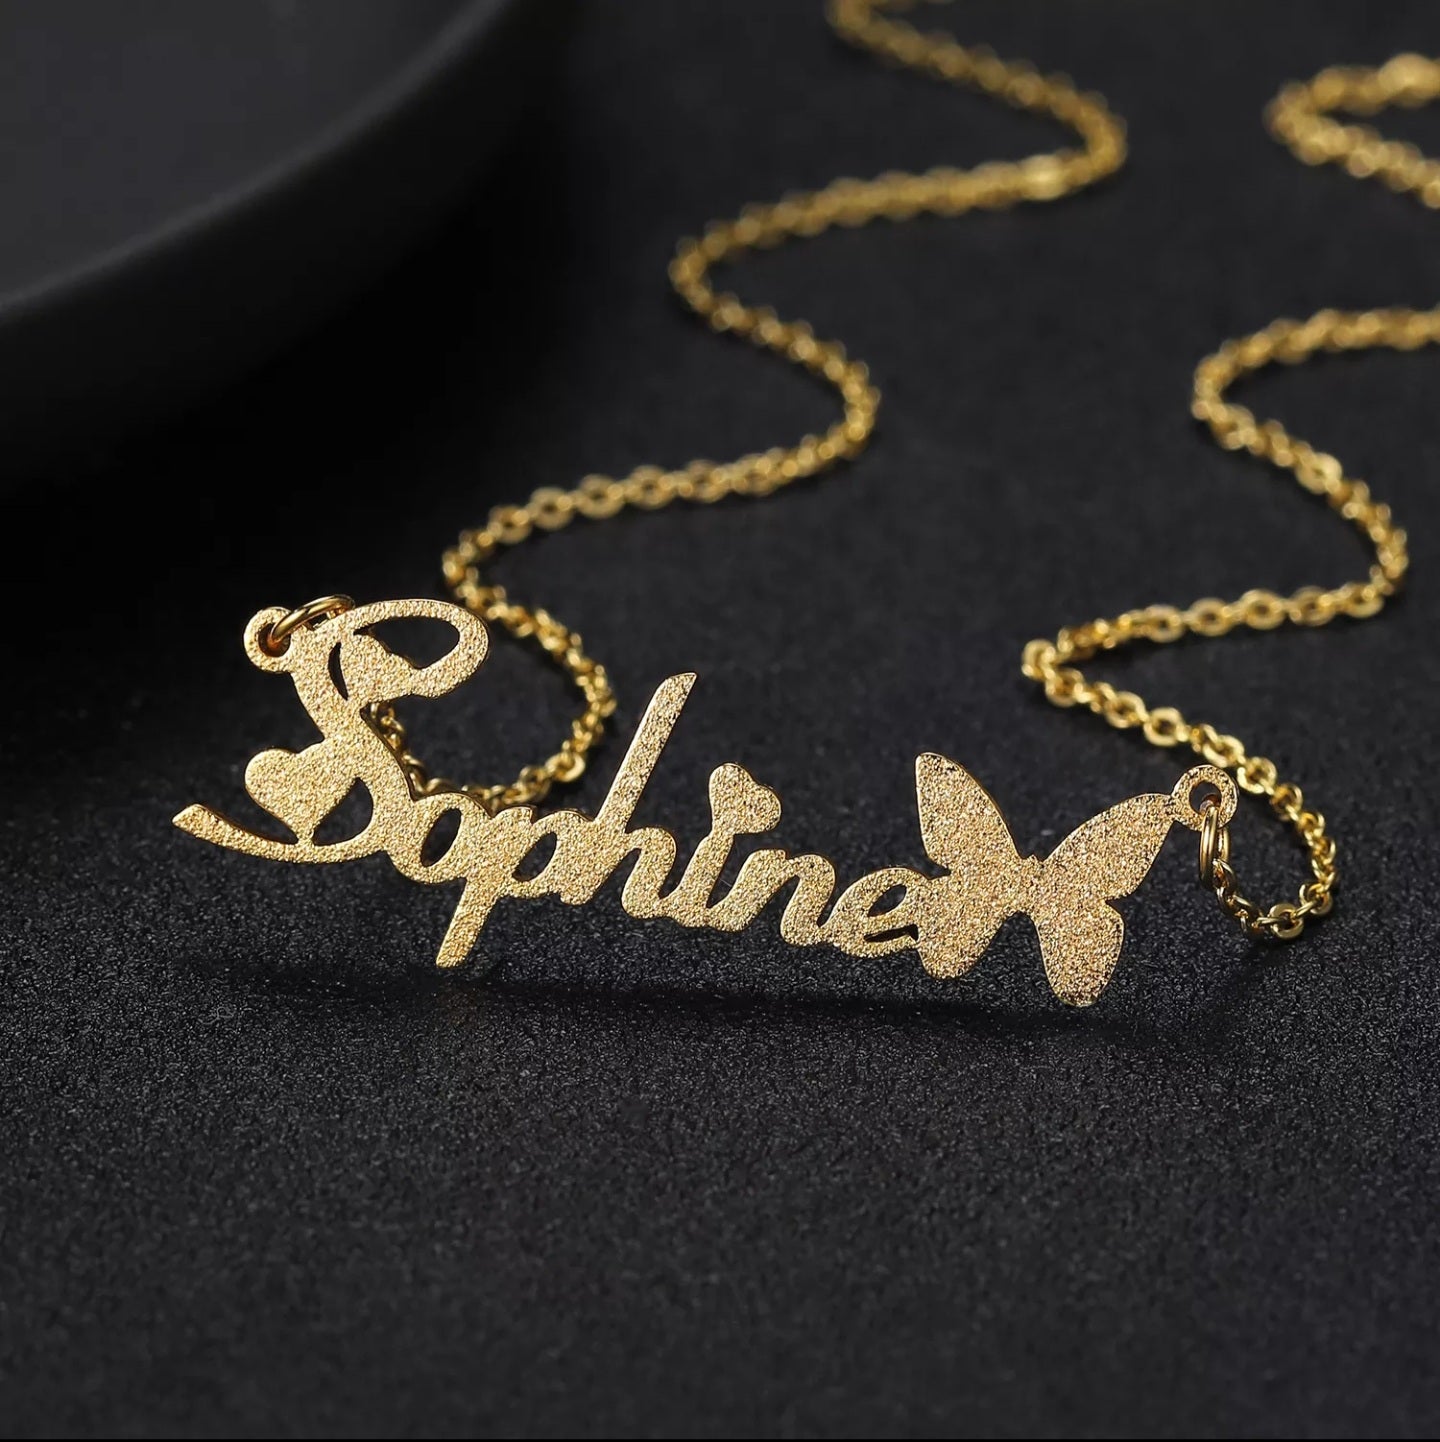 Personalised Custom Made Glittery Single Name Pendant Necklace - Maya Sand Blasted Jewellery Gifts -  Butterfly Be Shimmery - KIARA